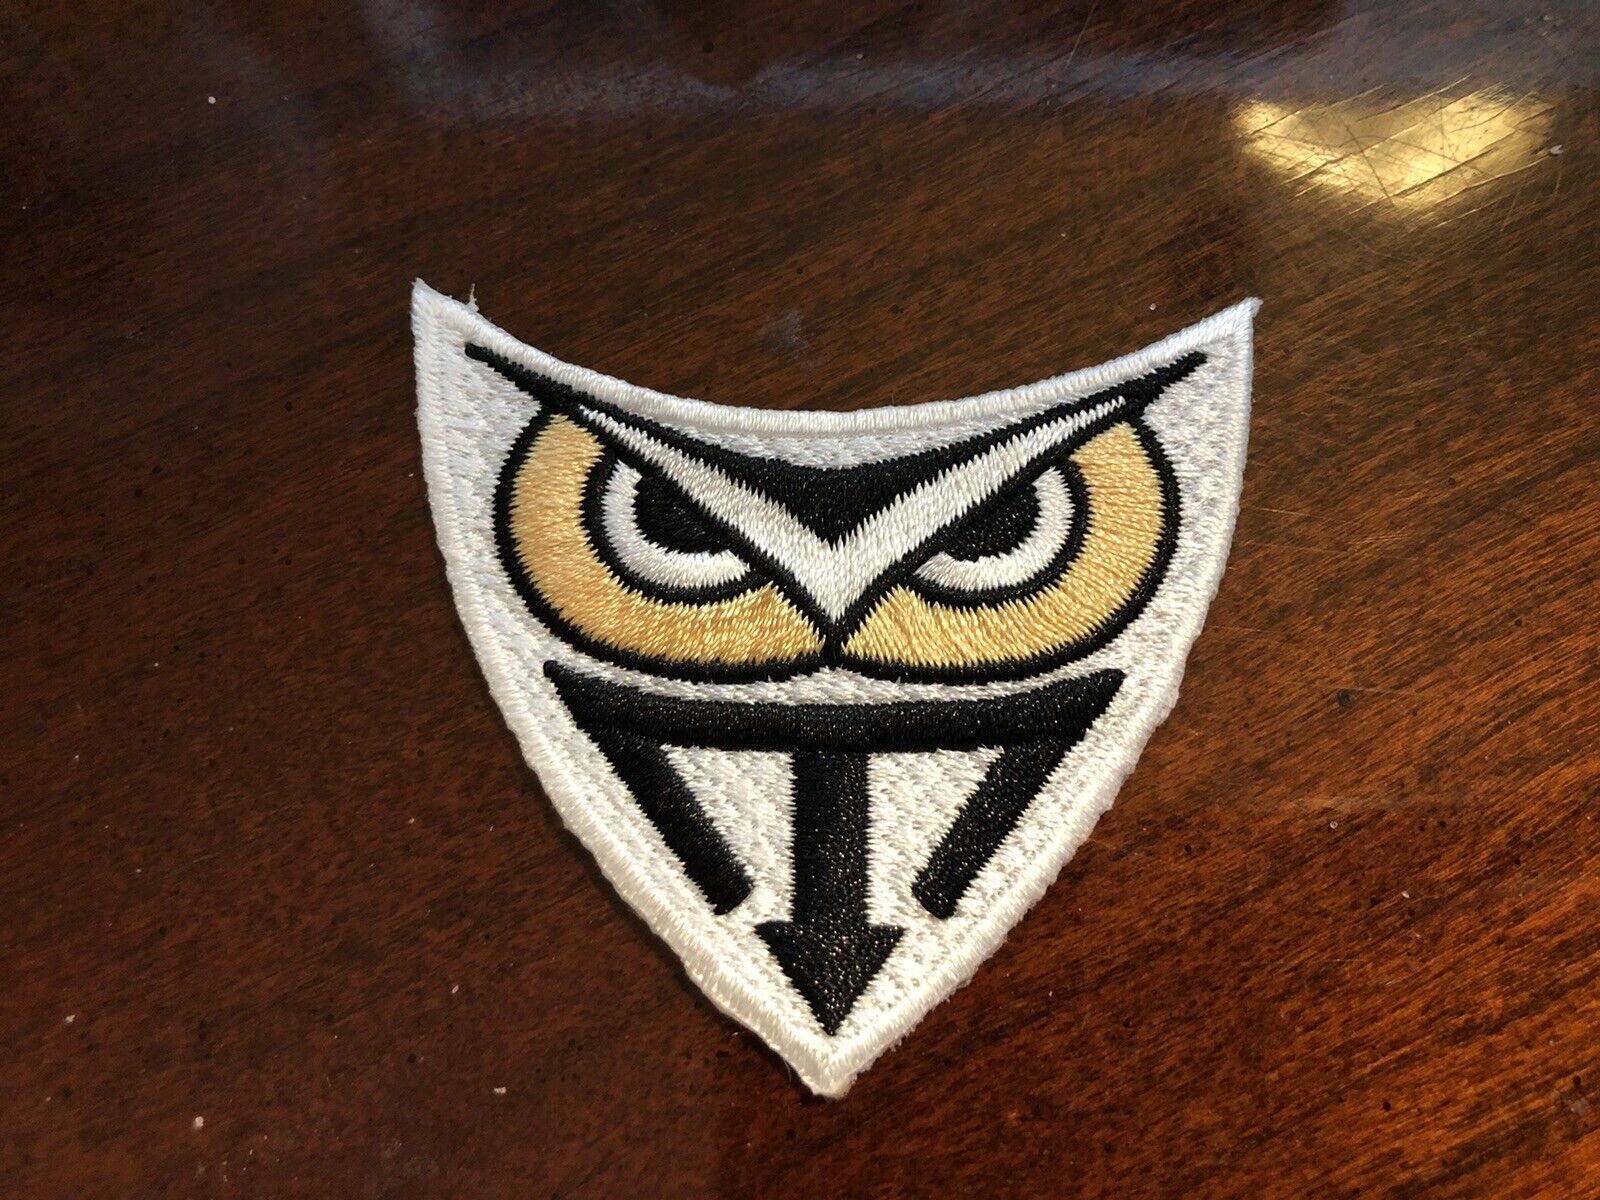 Loot Crate Blade Runner Tyrell Owl Genetic Patch Uniform Replicant